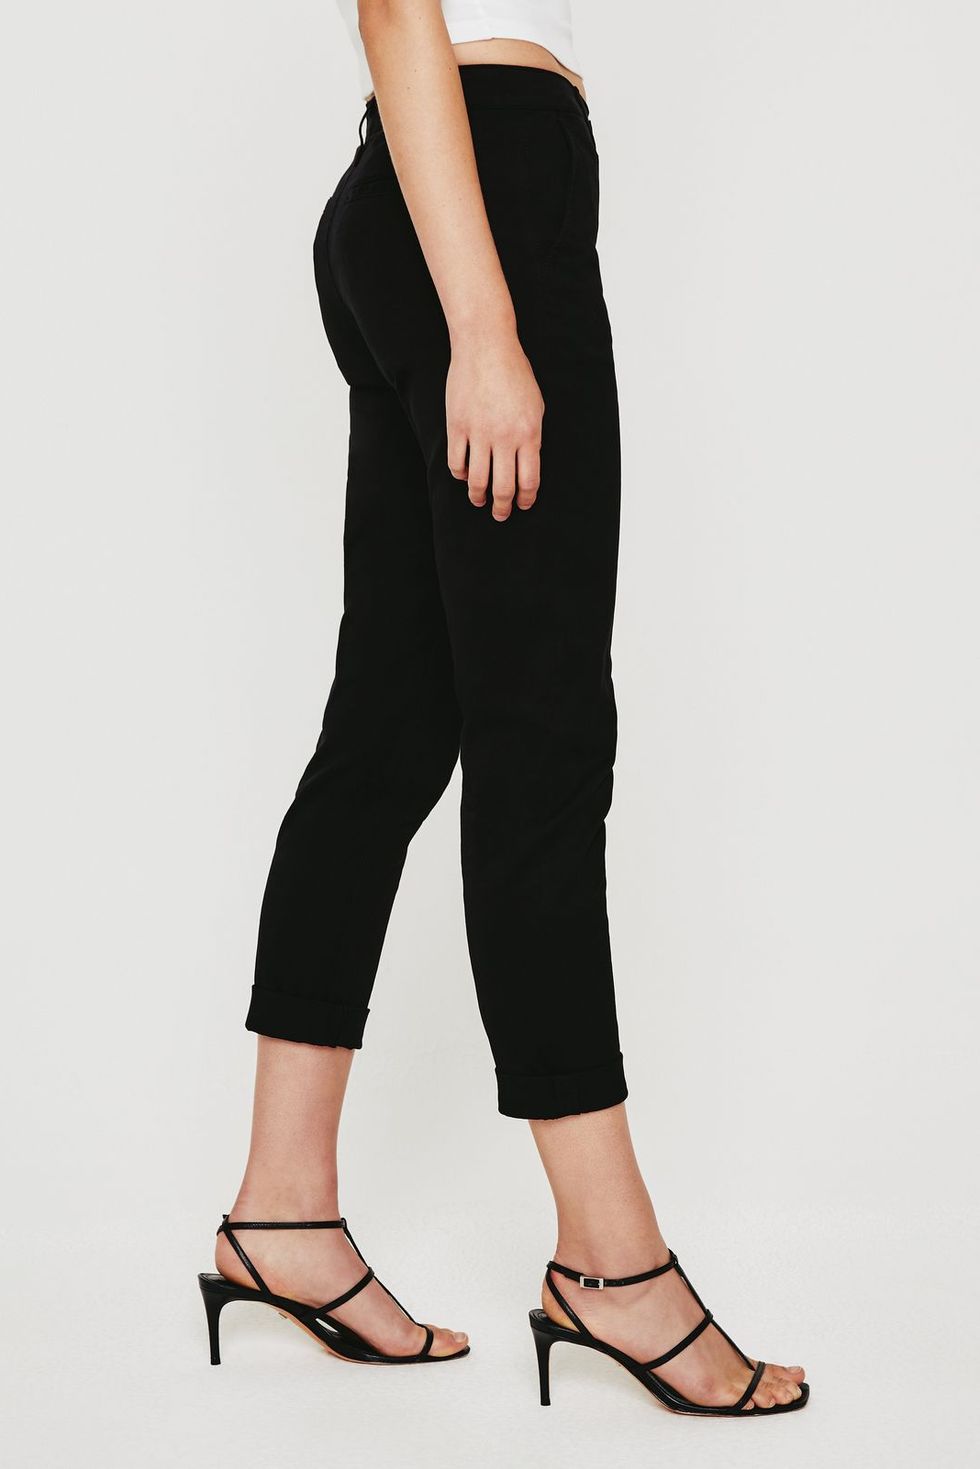 14 Black Work Pants for Women to Bring Style to the Office in 2023